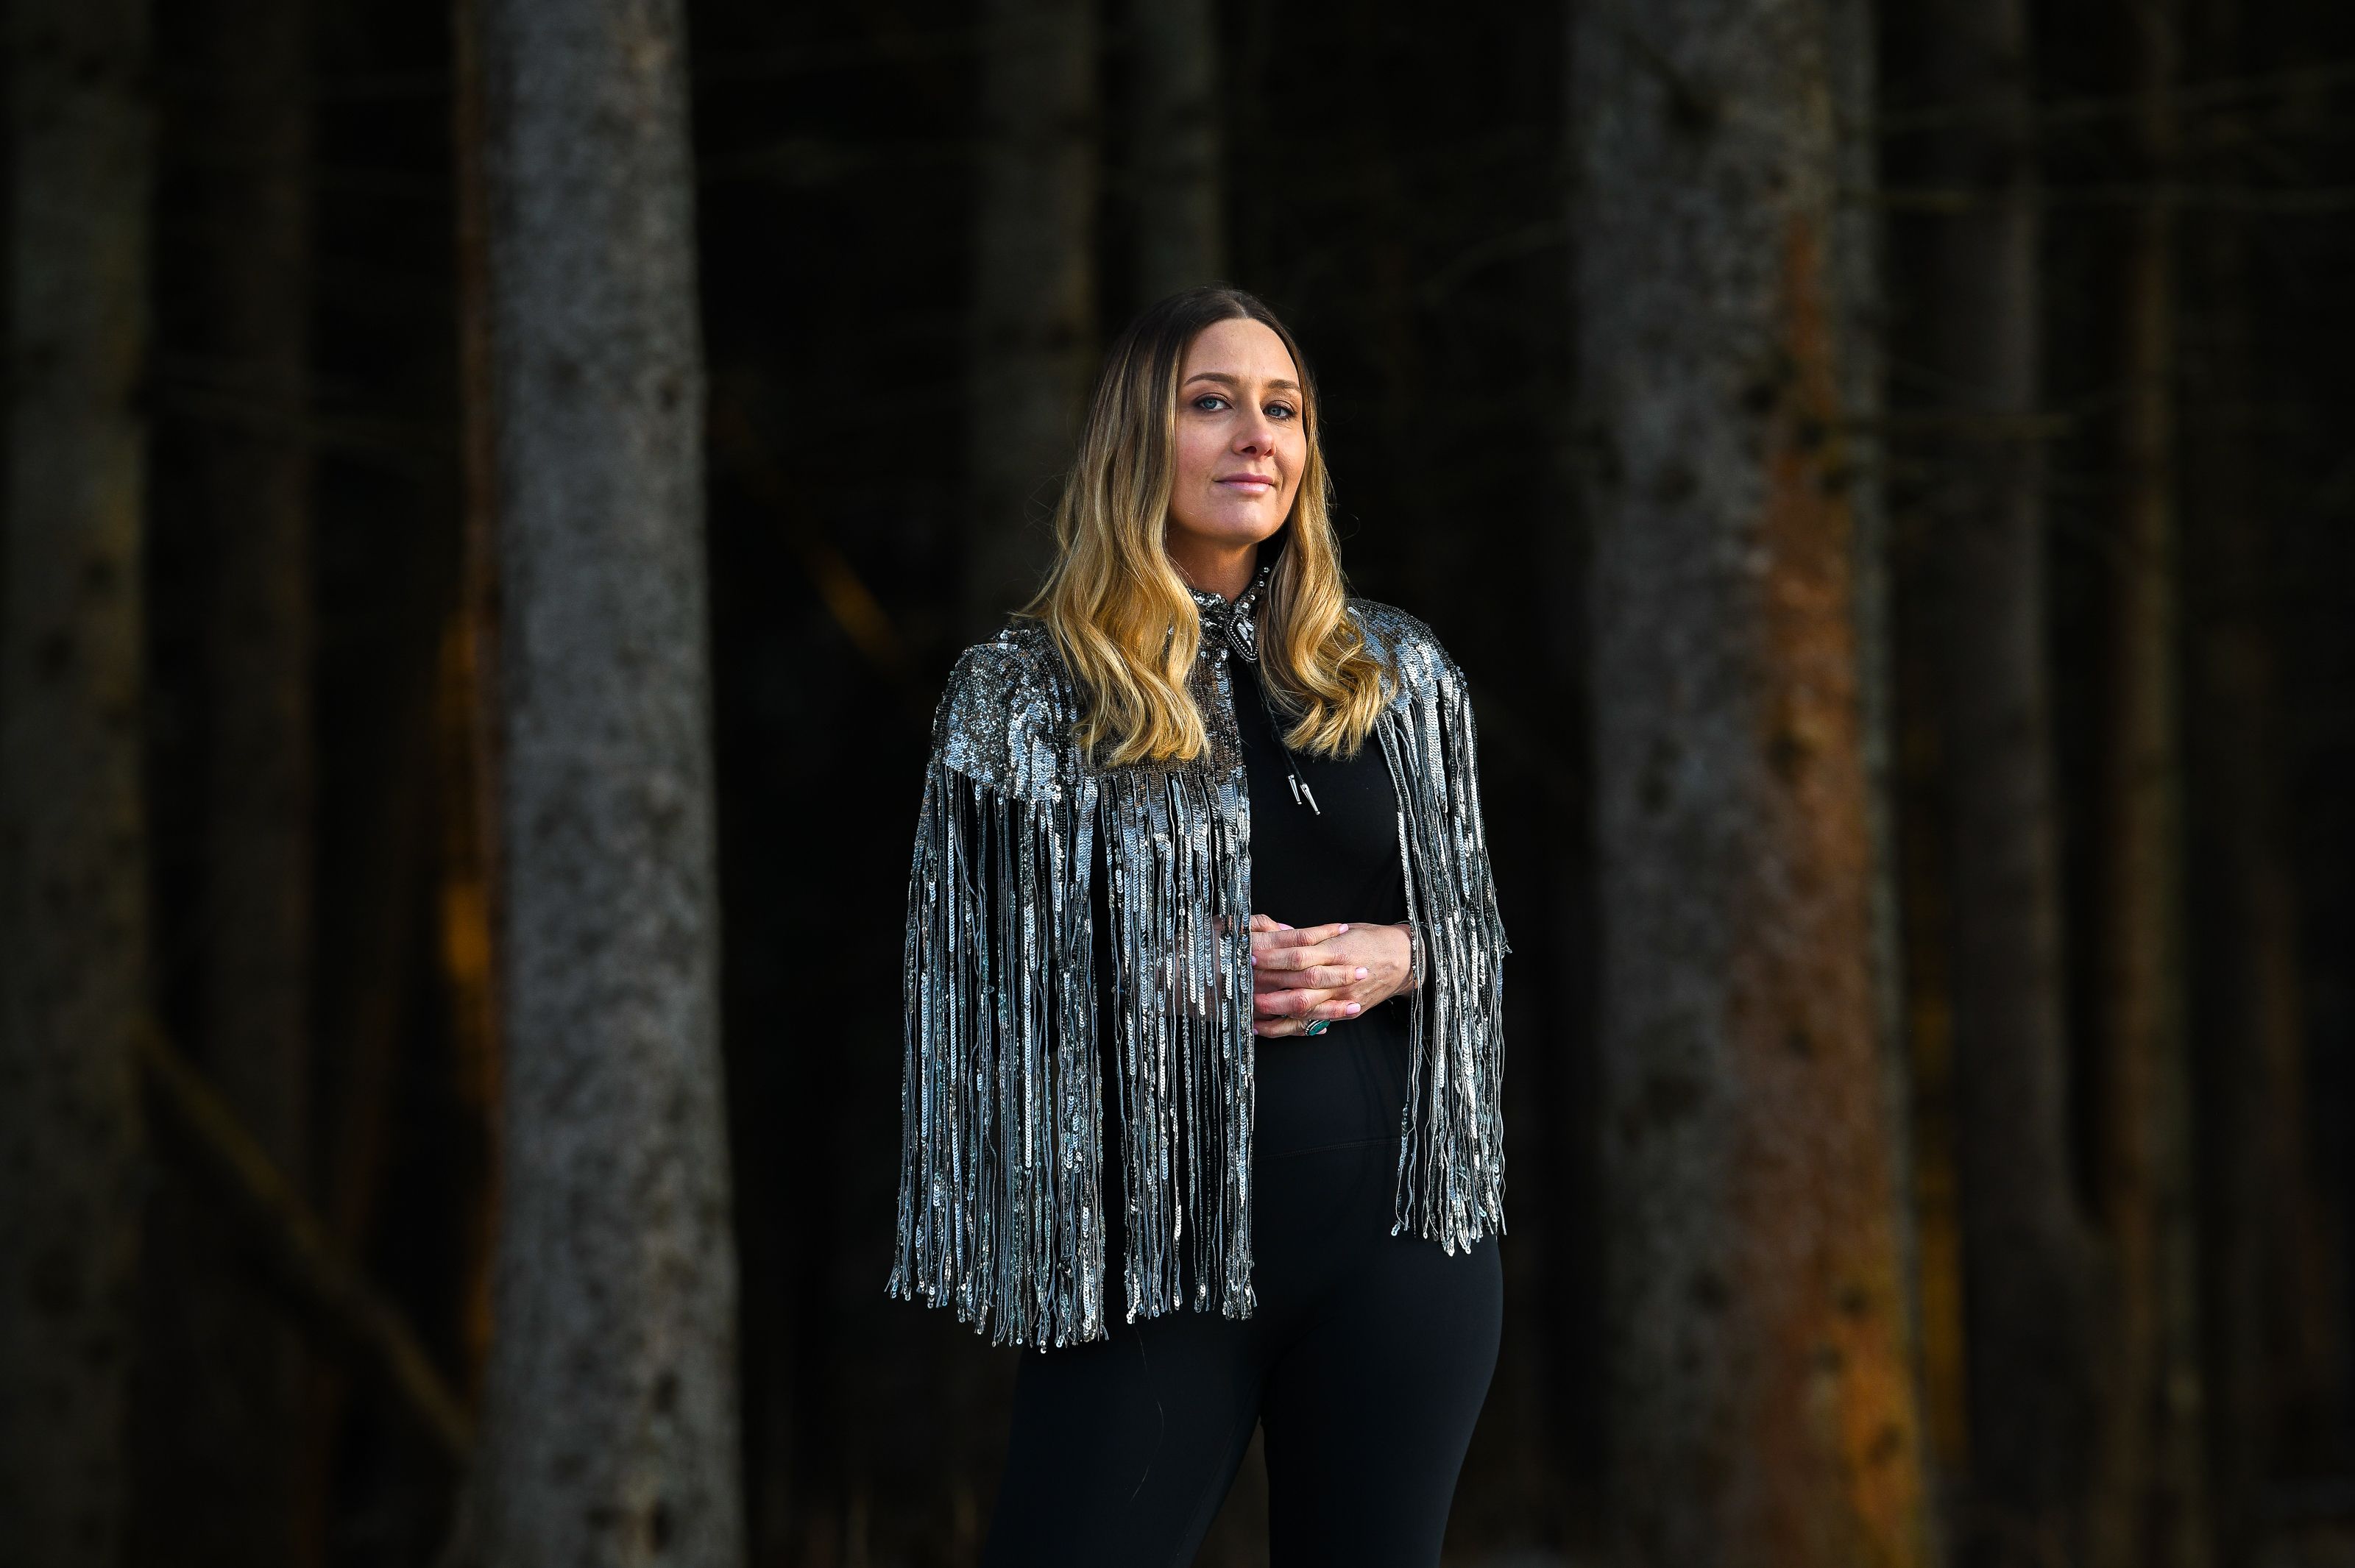 After a successful career in advertising and media, Tremblay quit her day job as the head of video at Bustle, deciding to enroll in an immersion program to study Cayuga, her Indigenous language.